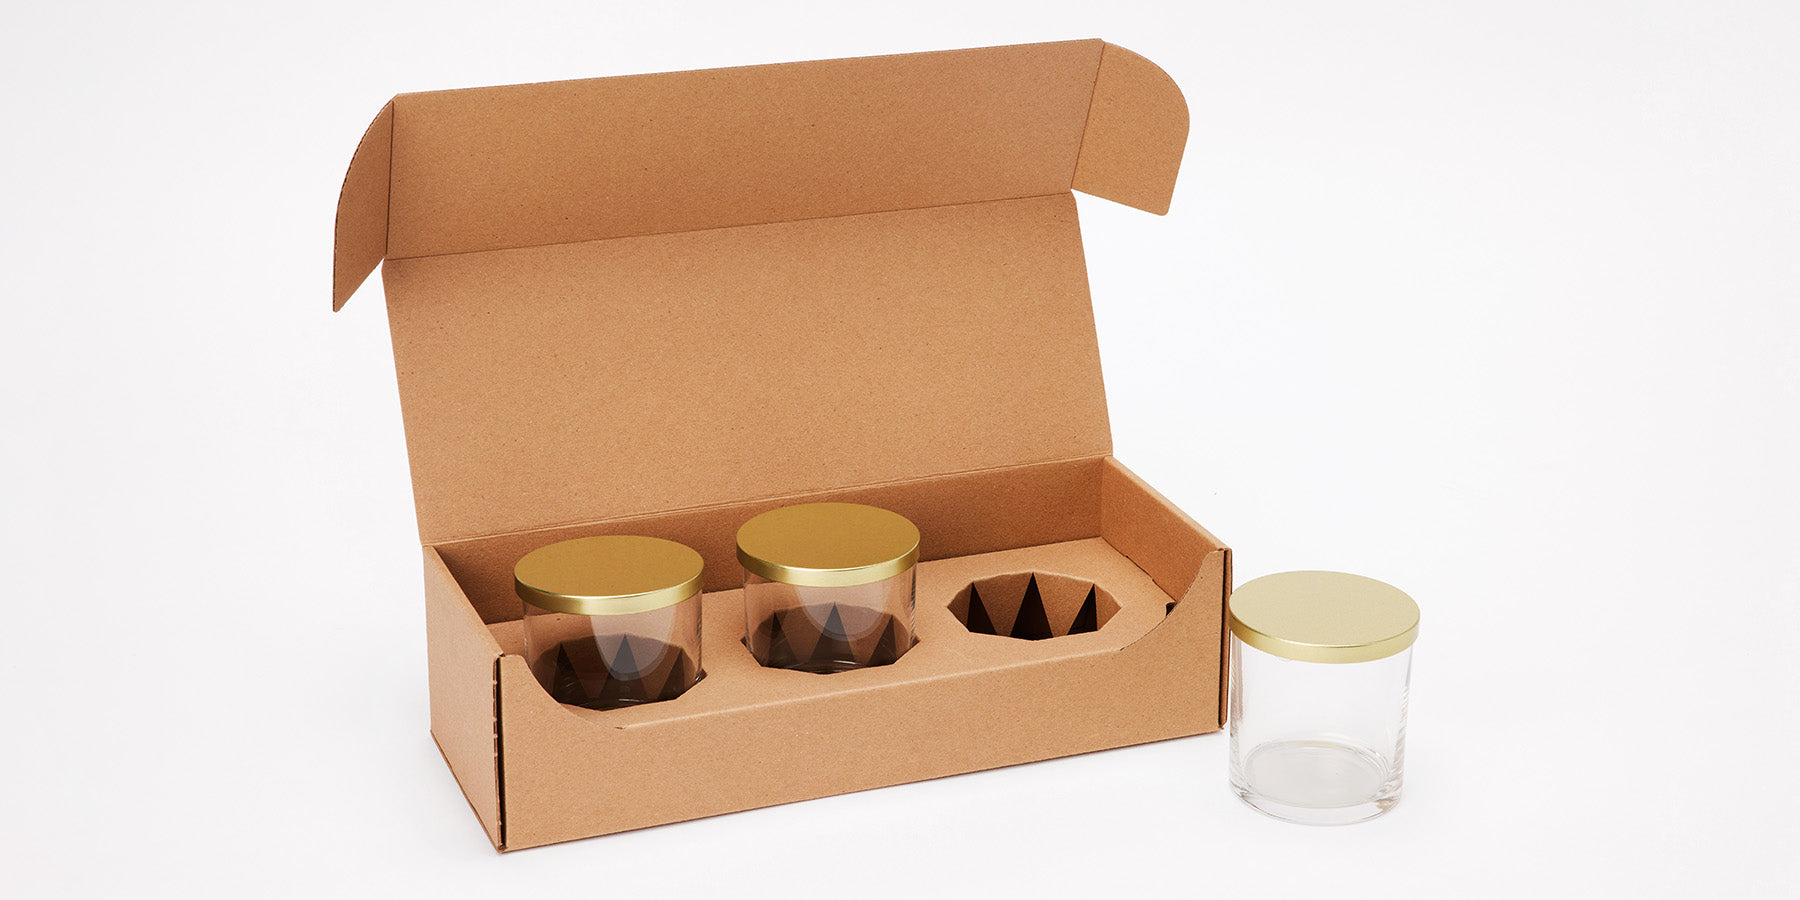 Protective Shipping Boxes and packaging for glass jars and tumblers available from Flush Packaging